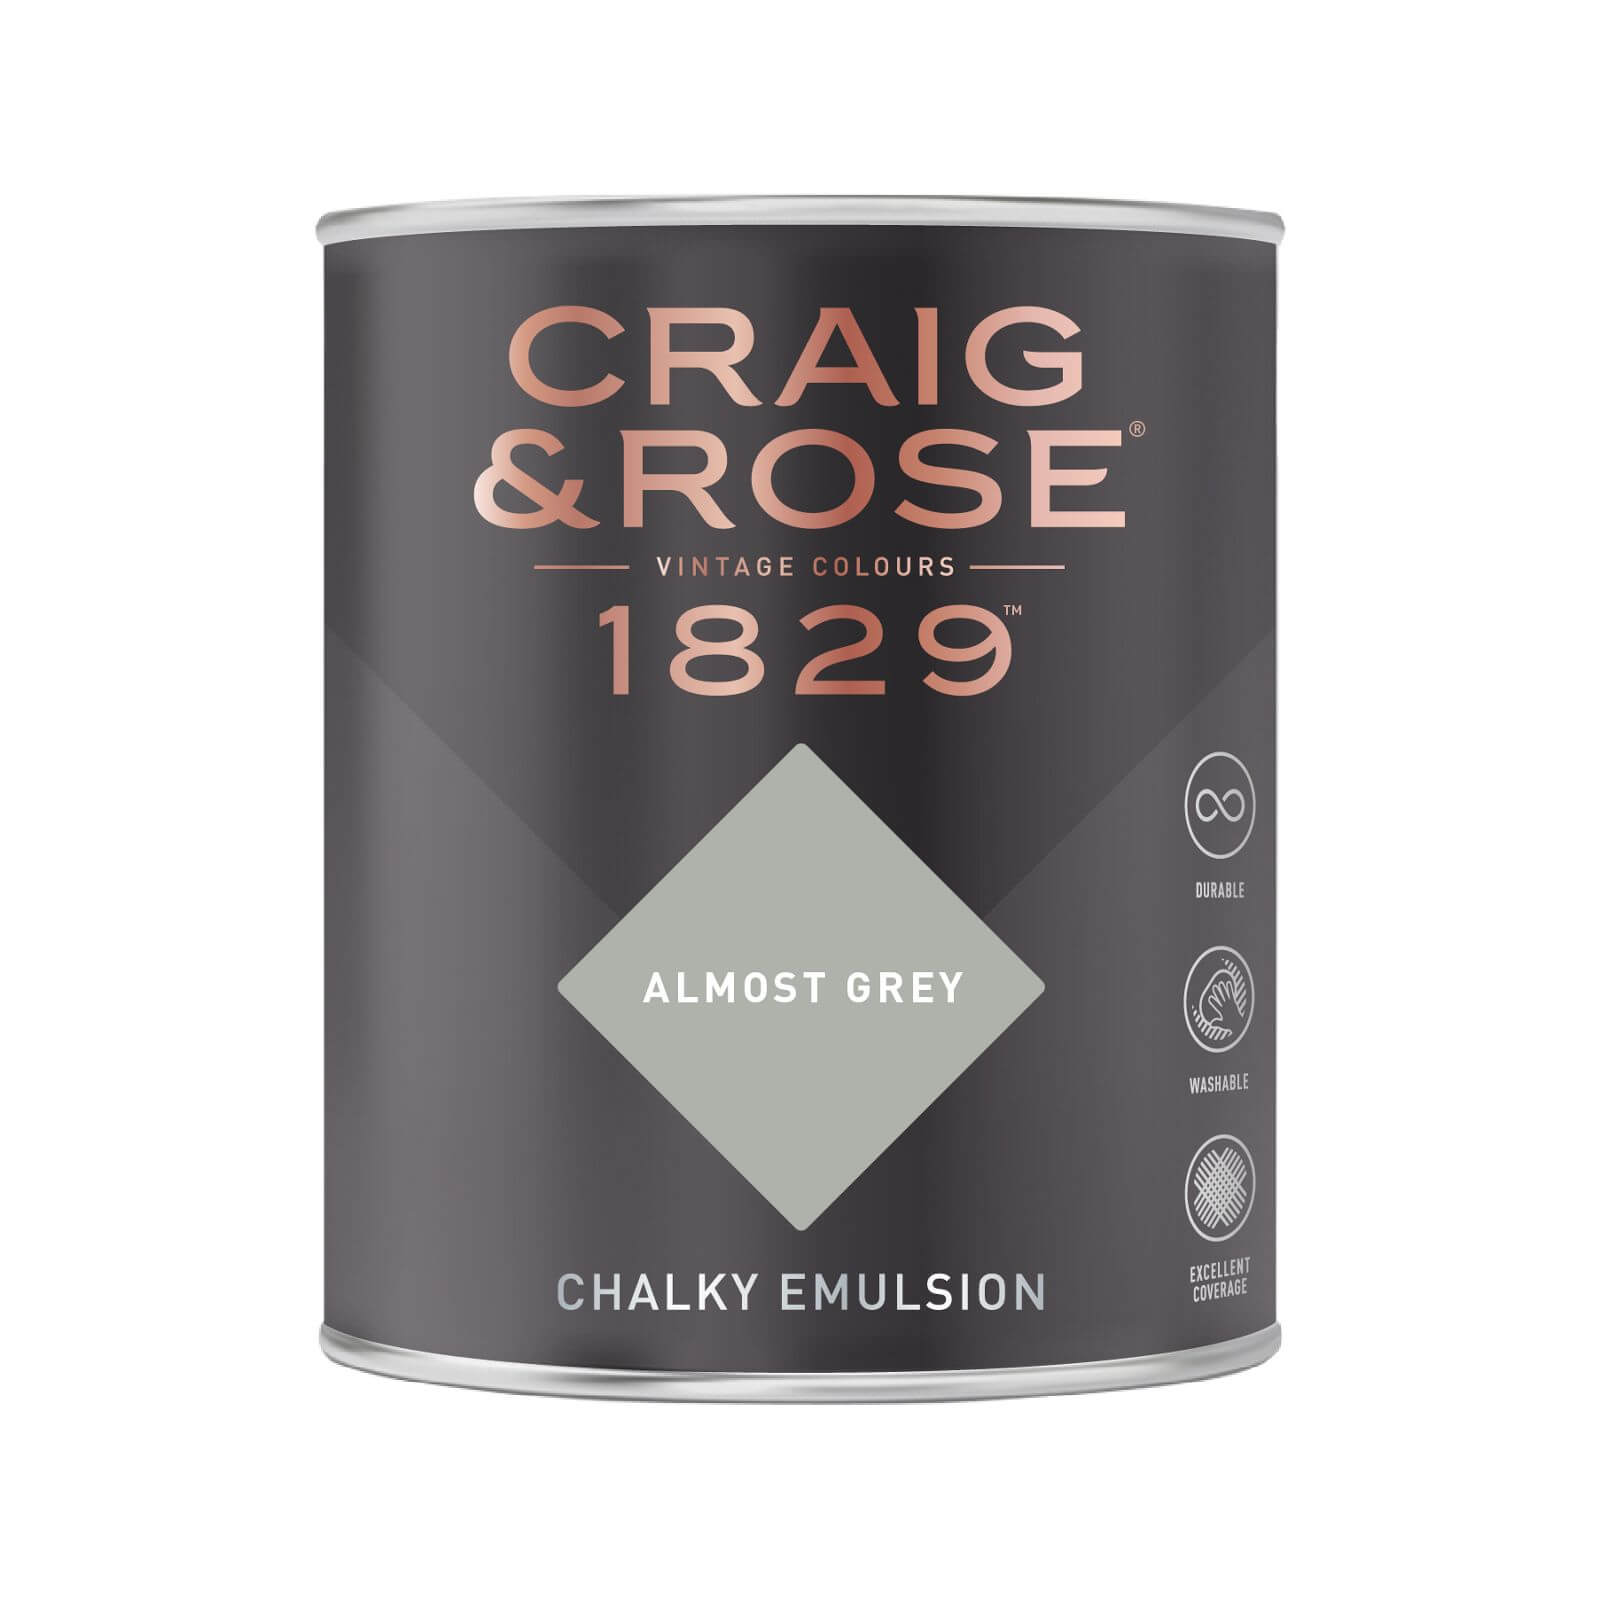 Craig & Rose 1829 Chalky Emulsion Paint Almost Grey - 750ml